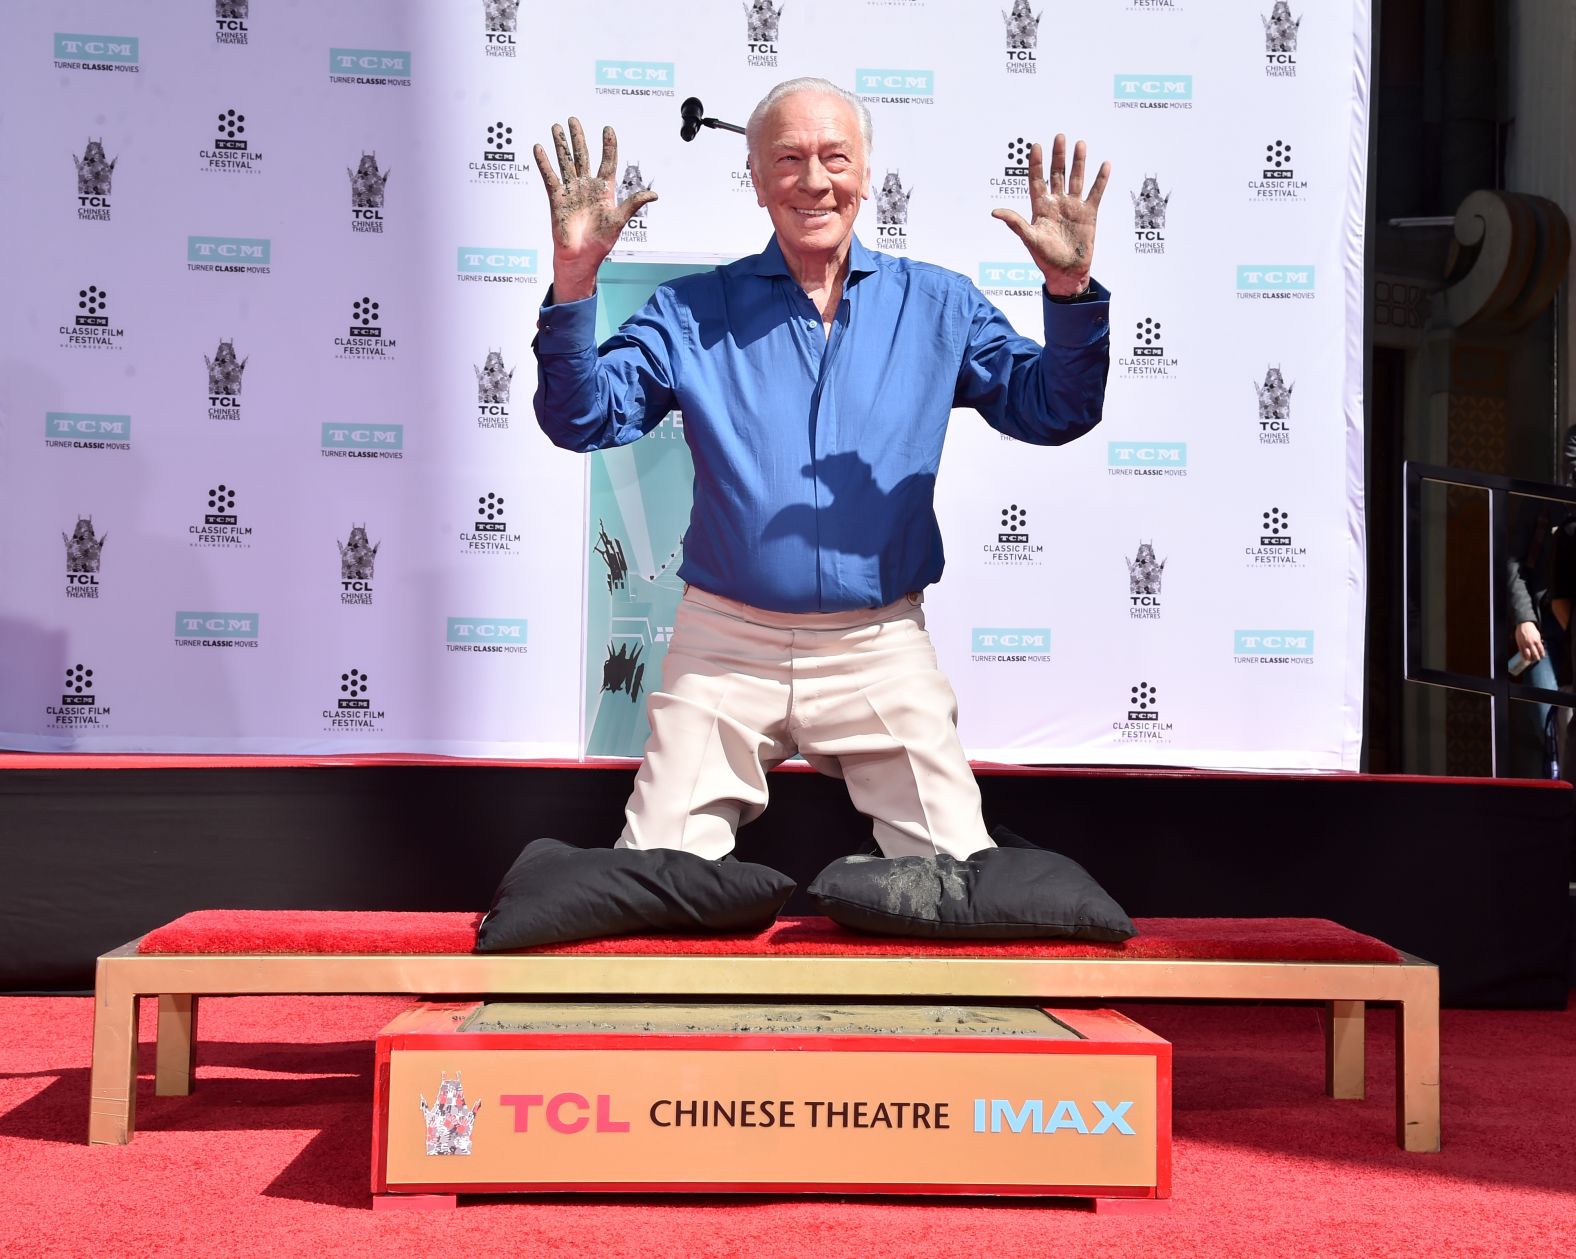 Plummer leaves his handprints at the famous TCL Chinese Theatre in Hollywood in 2015.